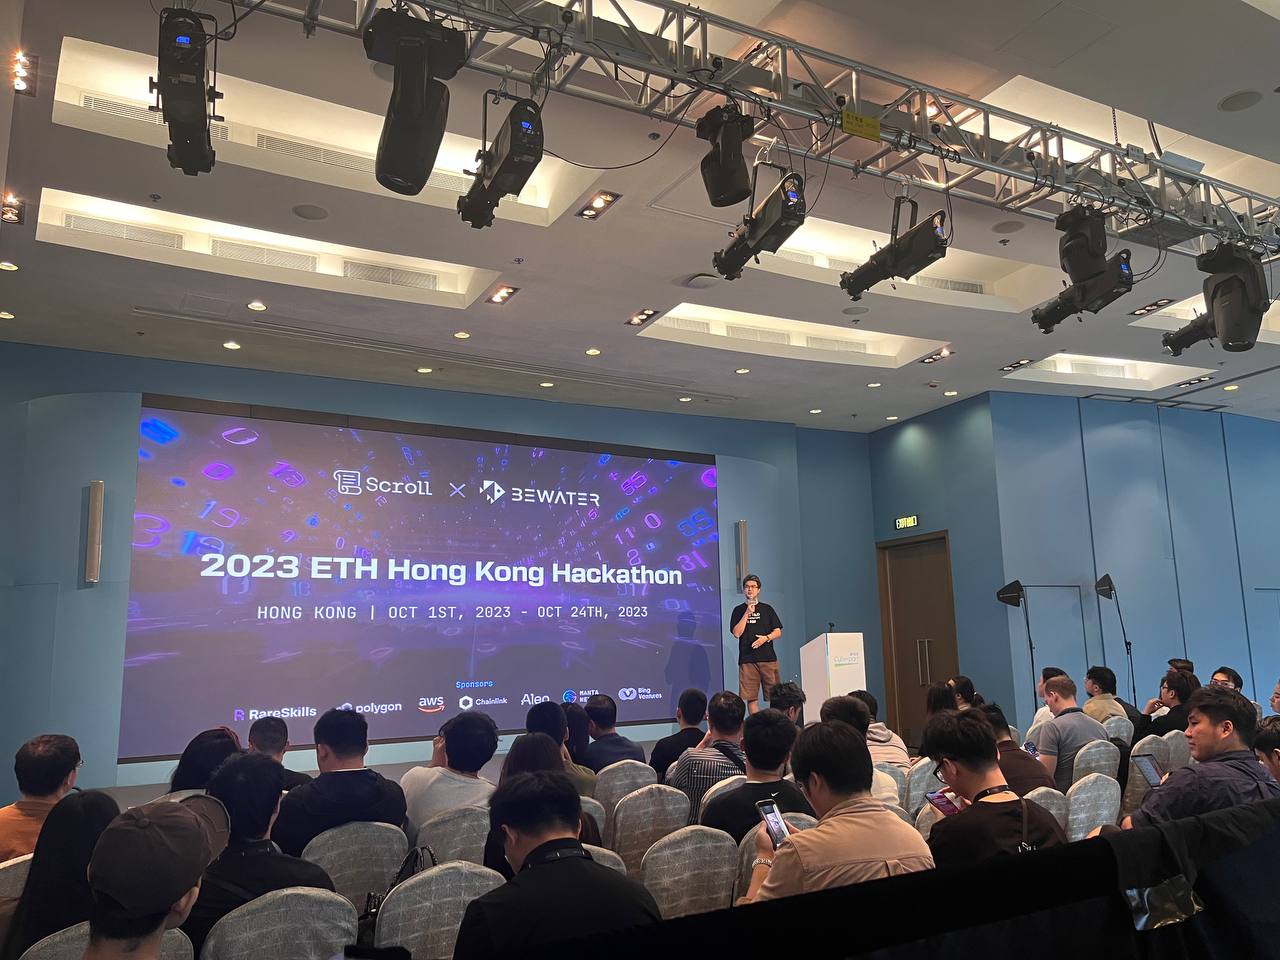 Complete Guide to the ETH Hong Kong 2023 Event